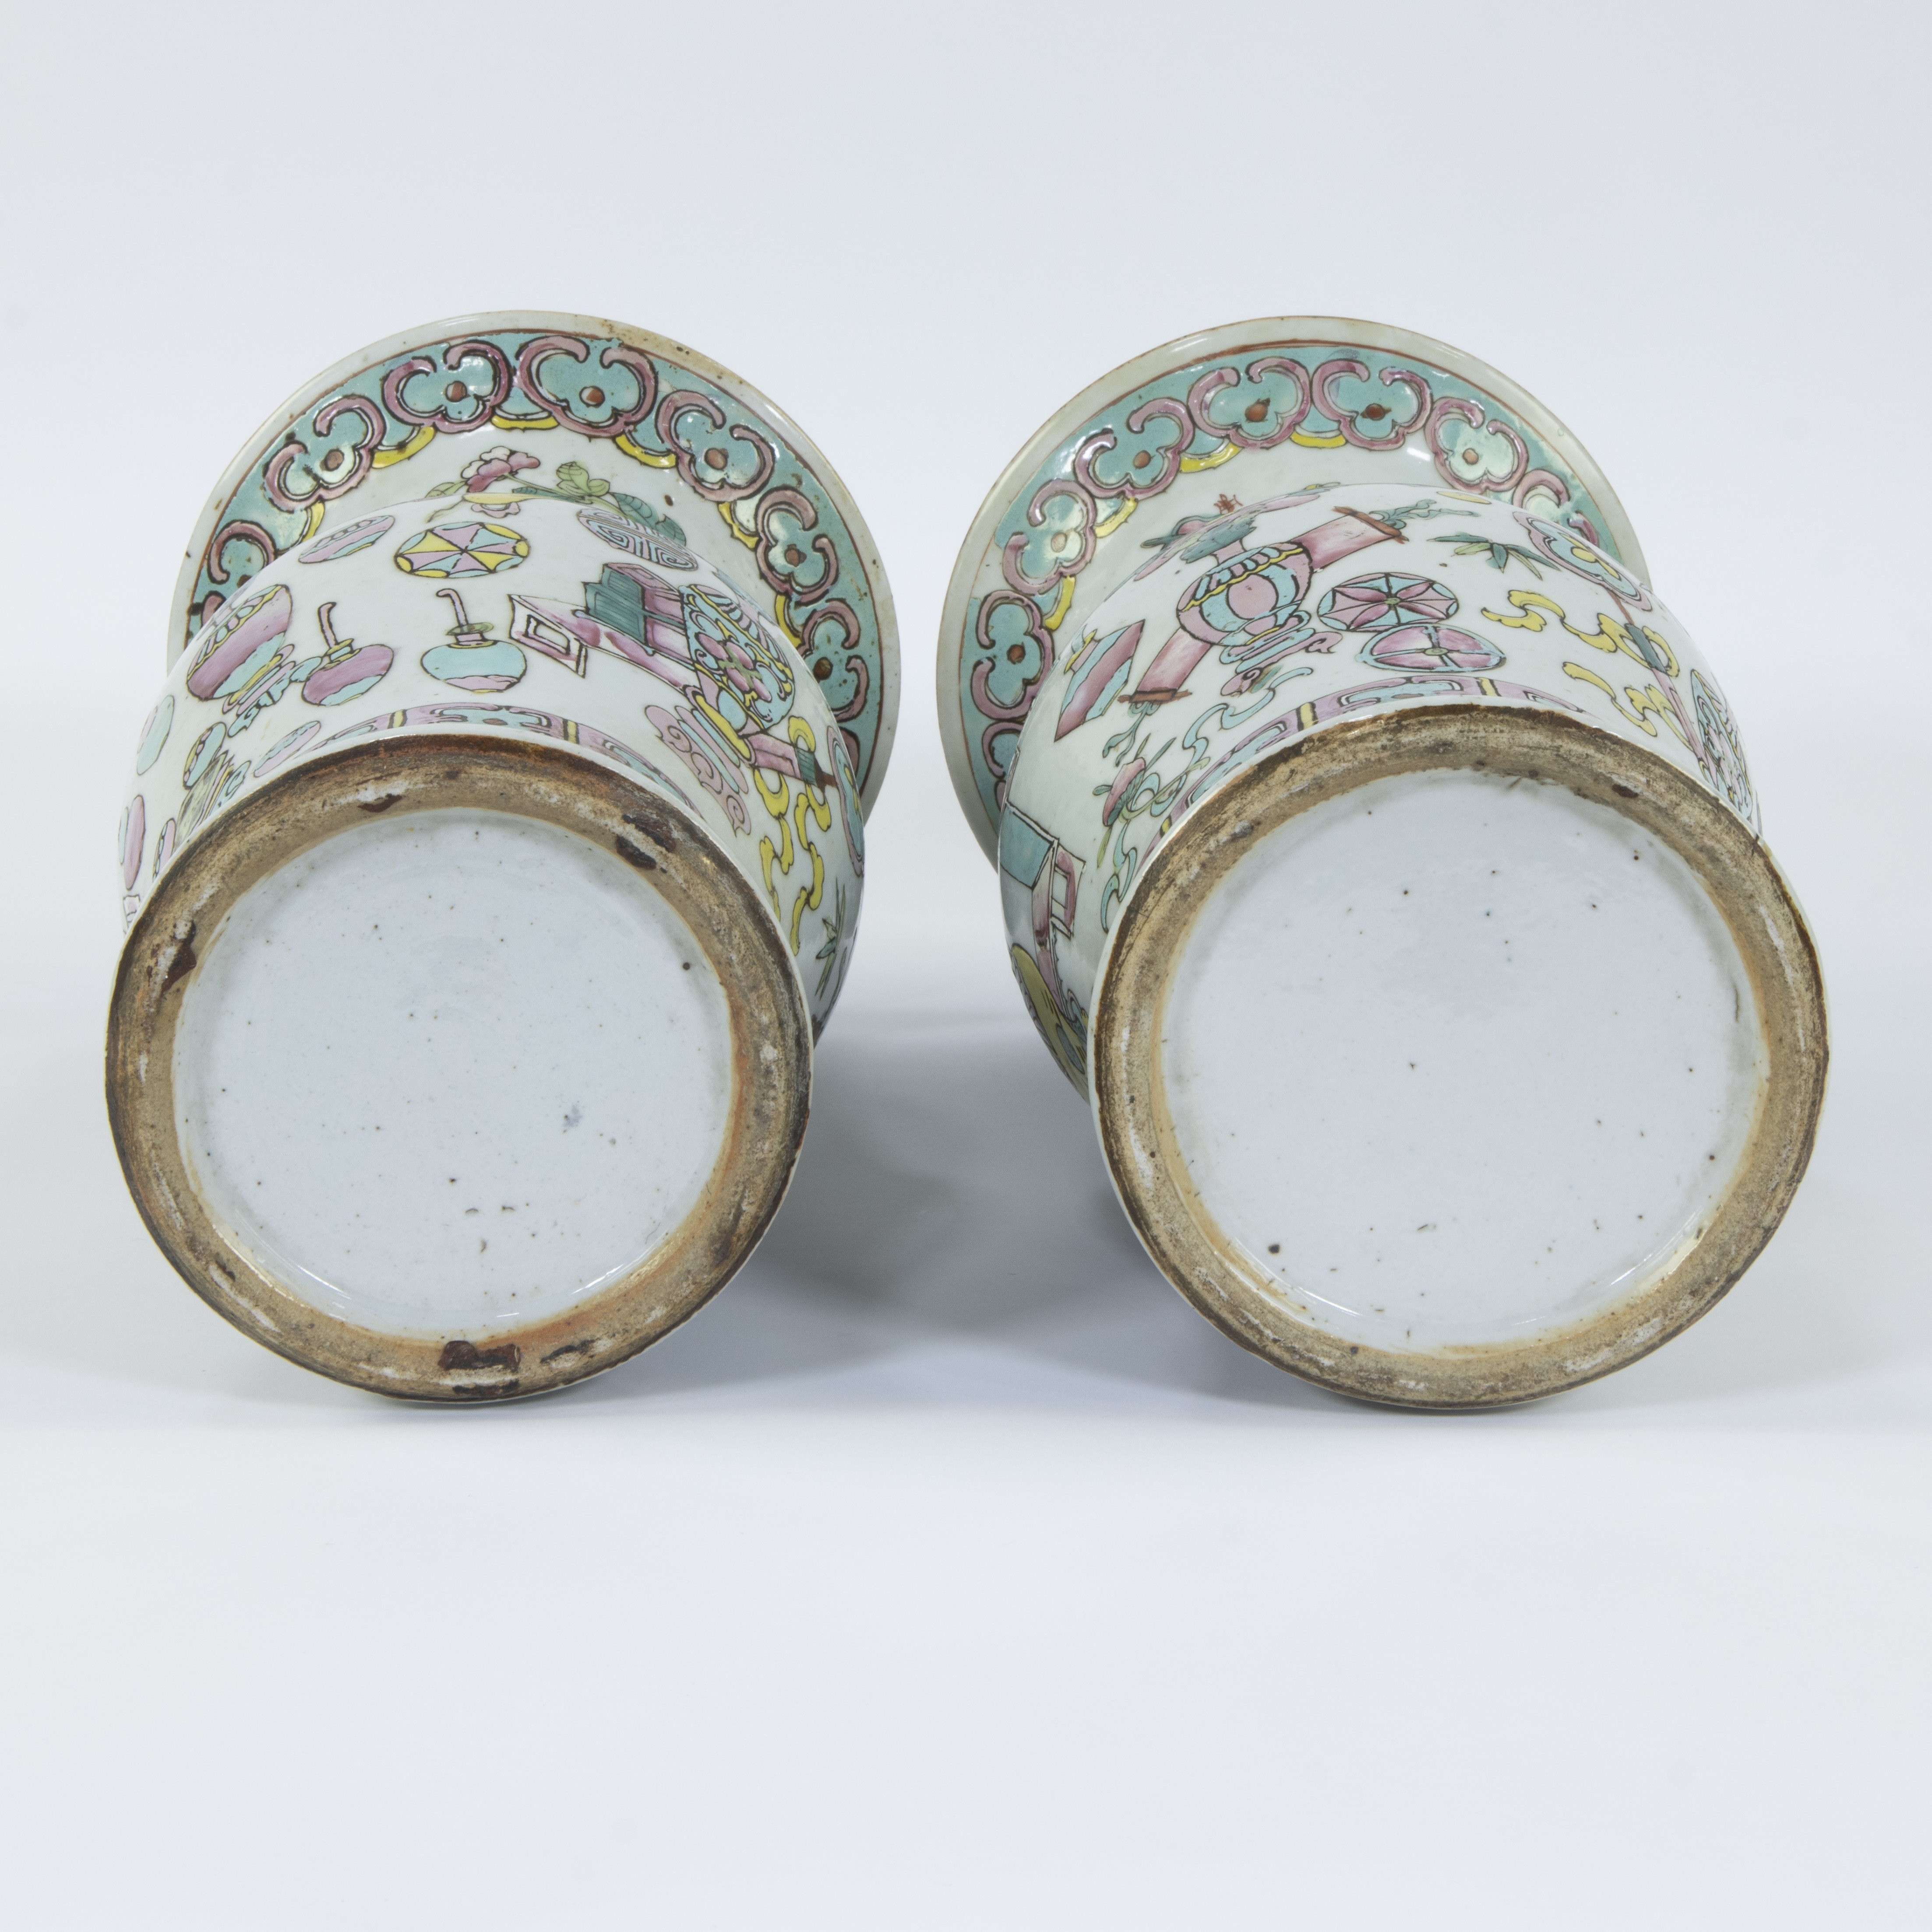 Pair of Chinese famille rose Yenyen vases with decoration of valuables, 19th century - Image 6 of 6